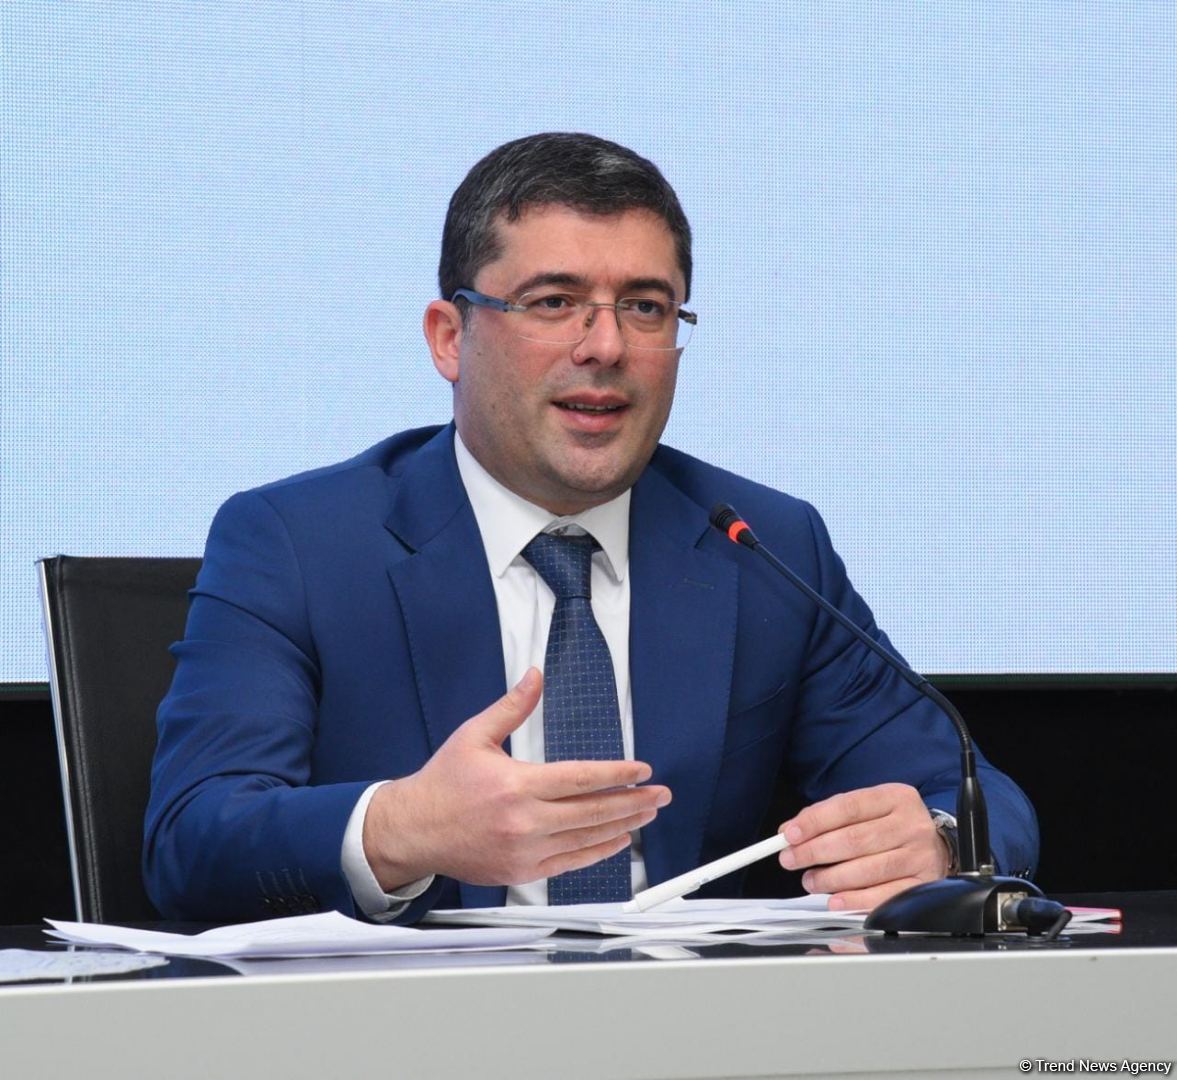 Azerbaijan's media entities not included in register to be held accountable - official